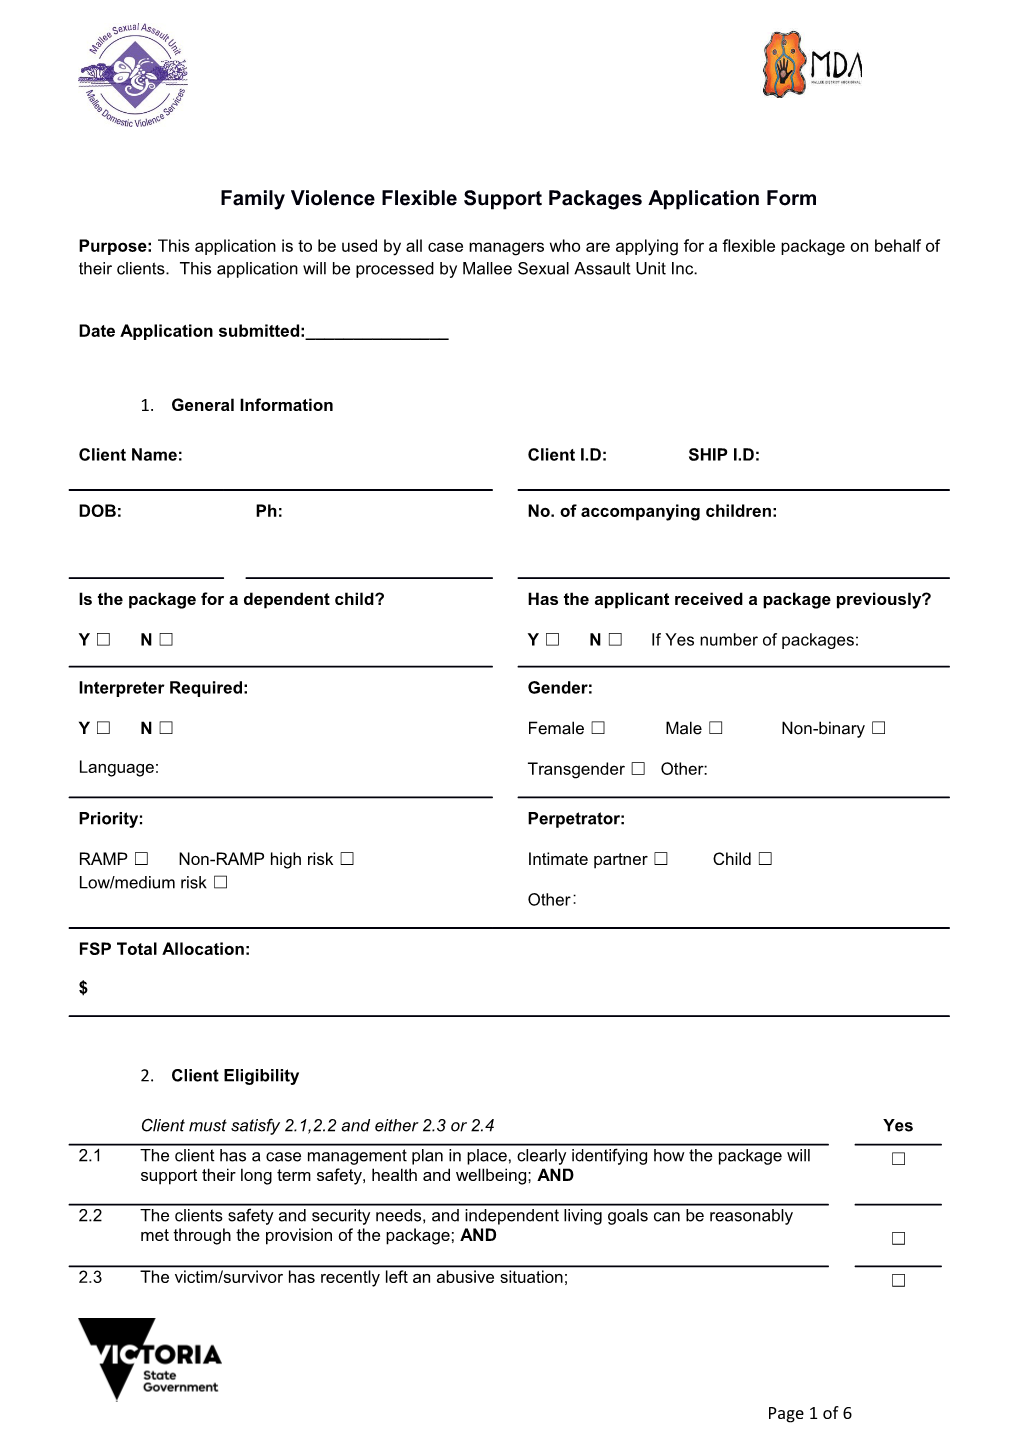 Family Violence Flexible Support Packages Application Form